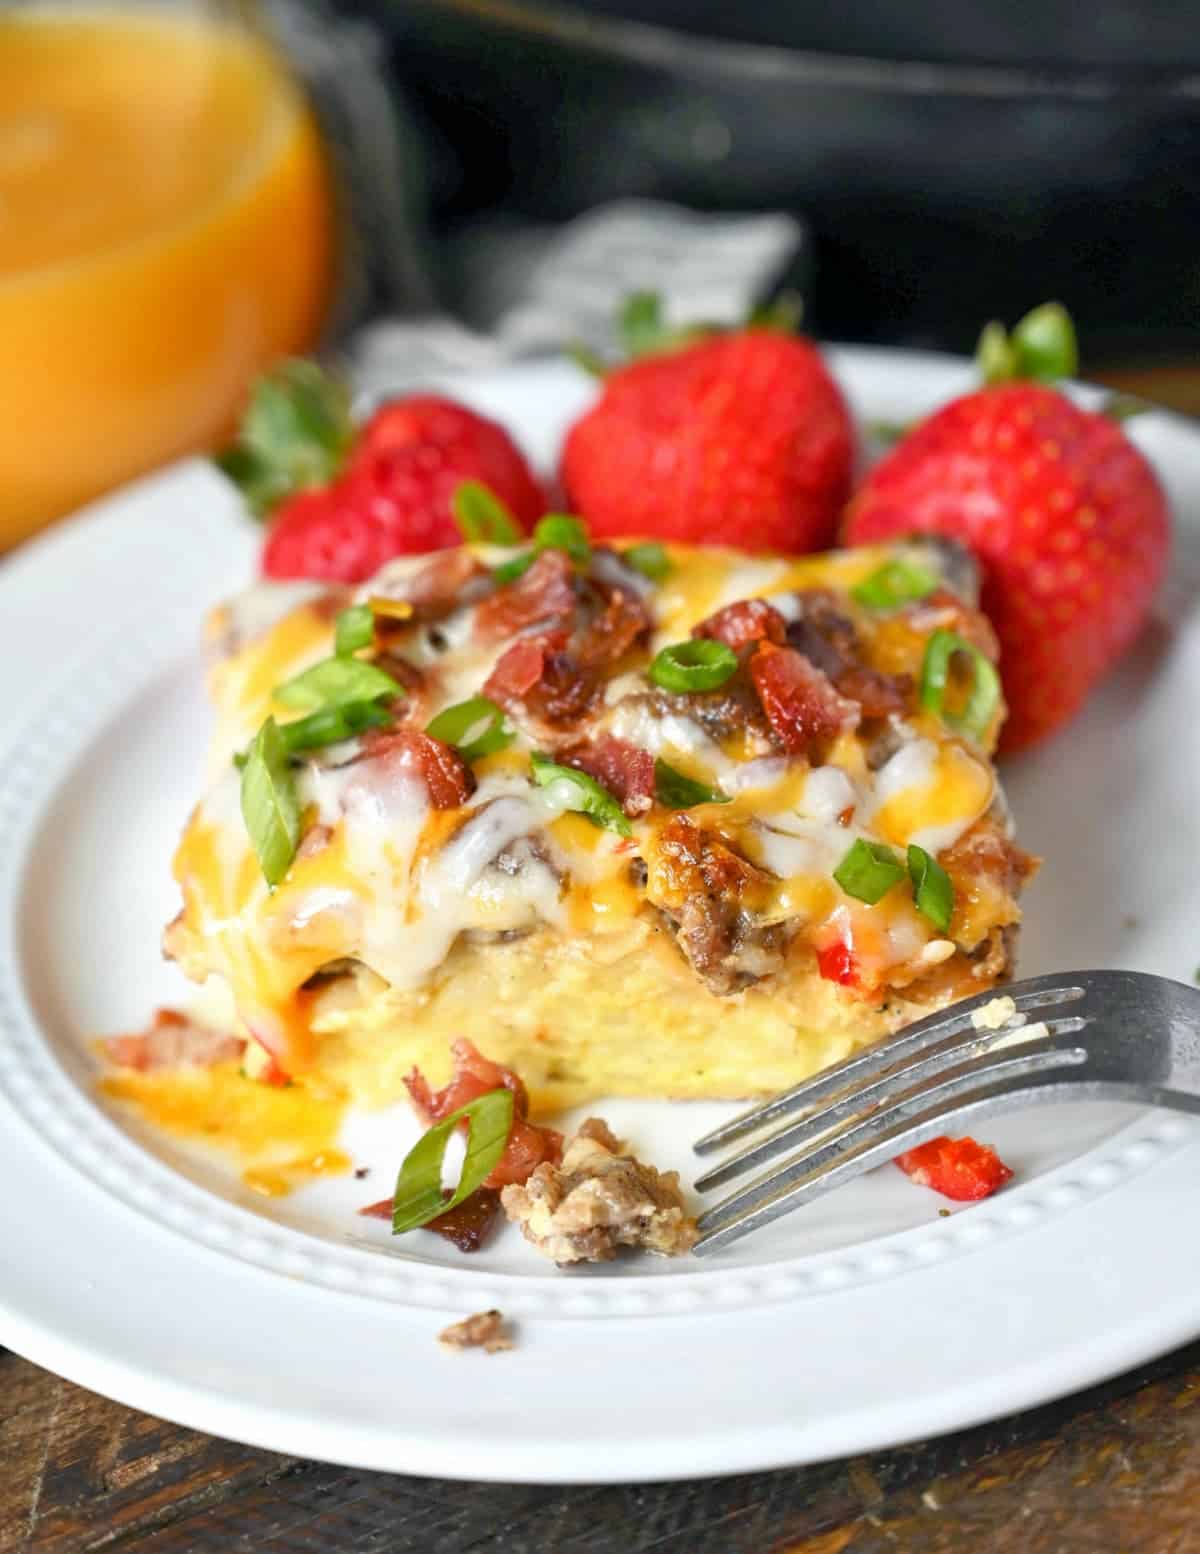 Breakfast casserole on a white plate with strawberries.